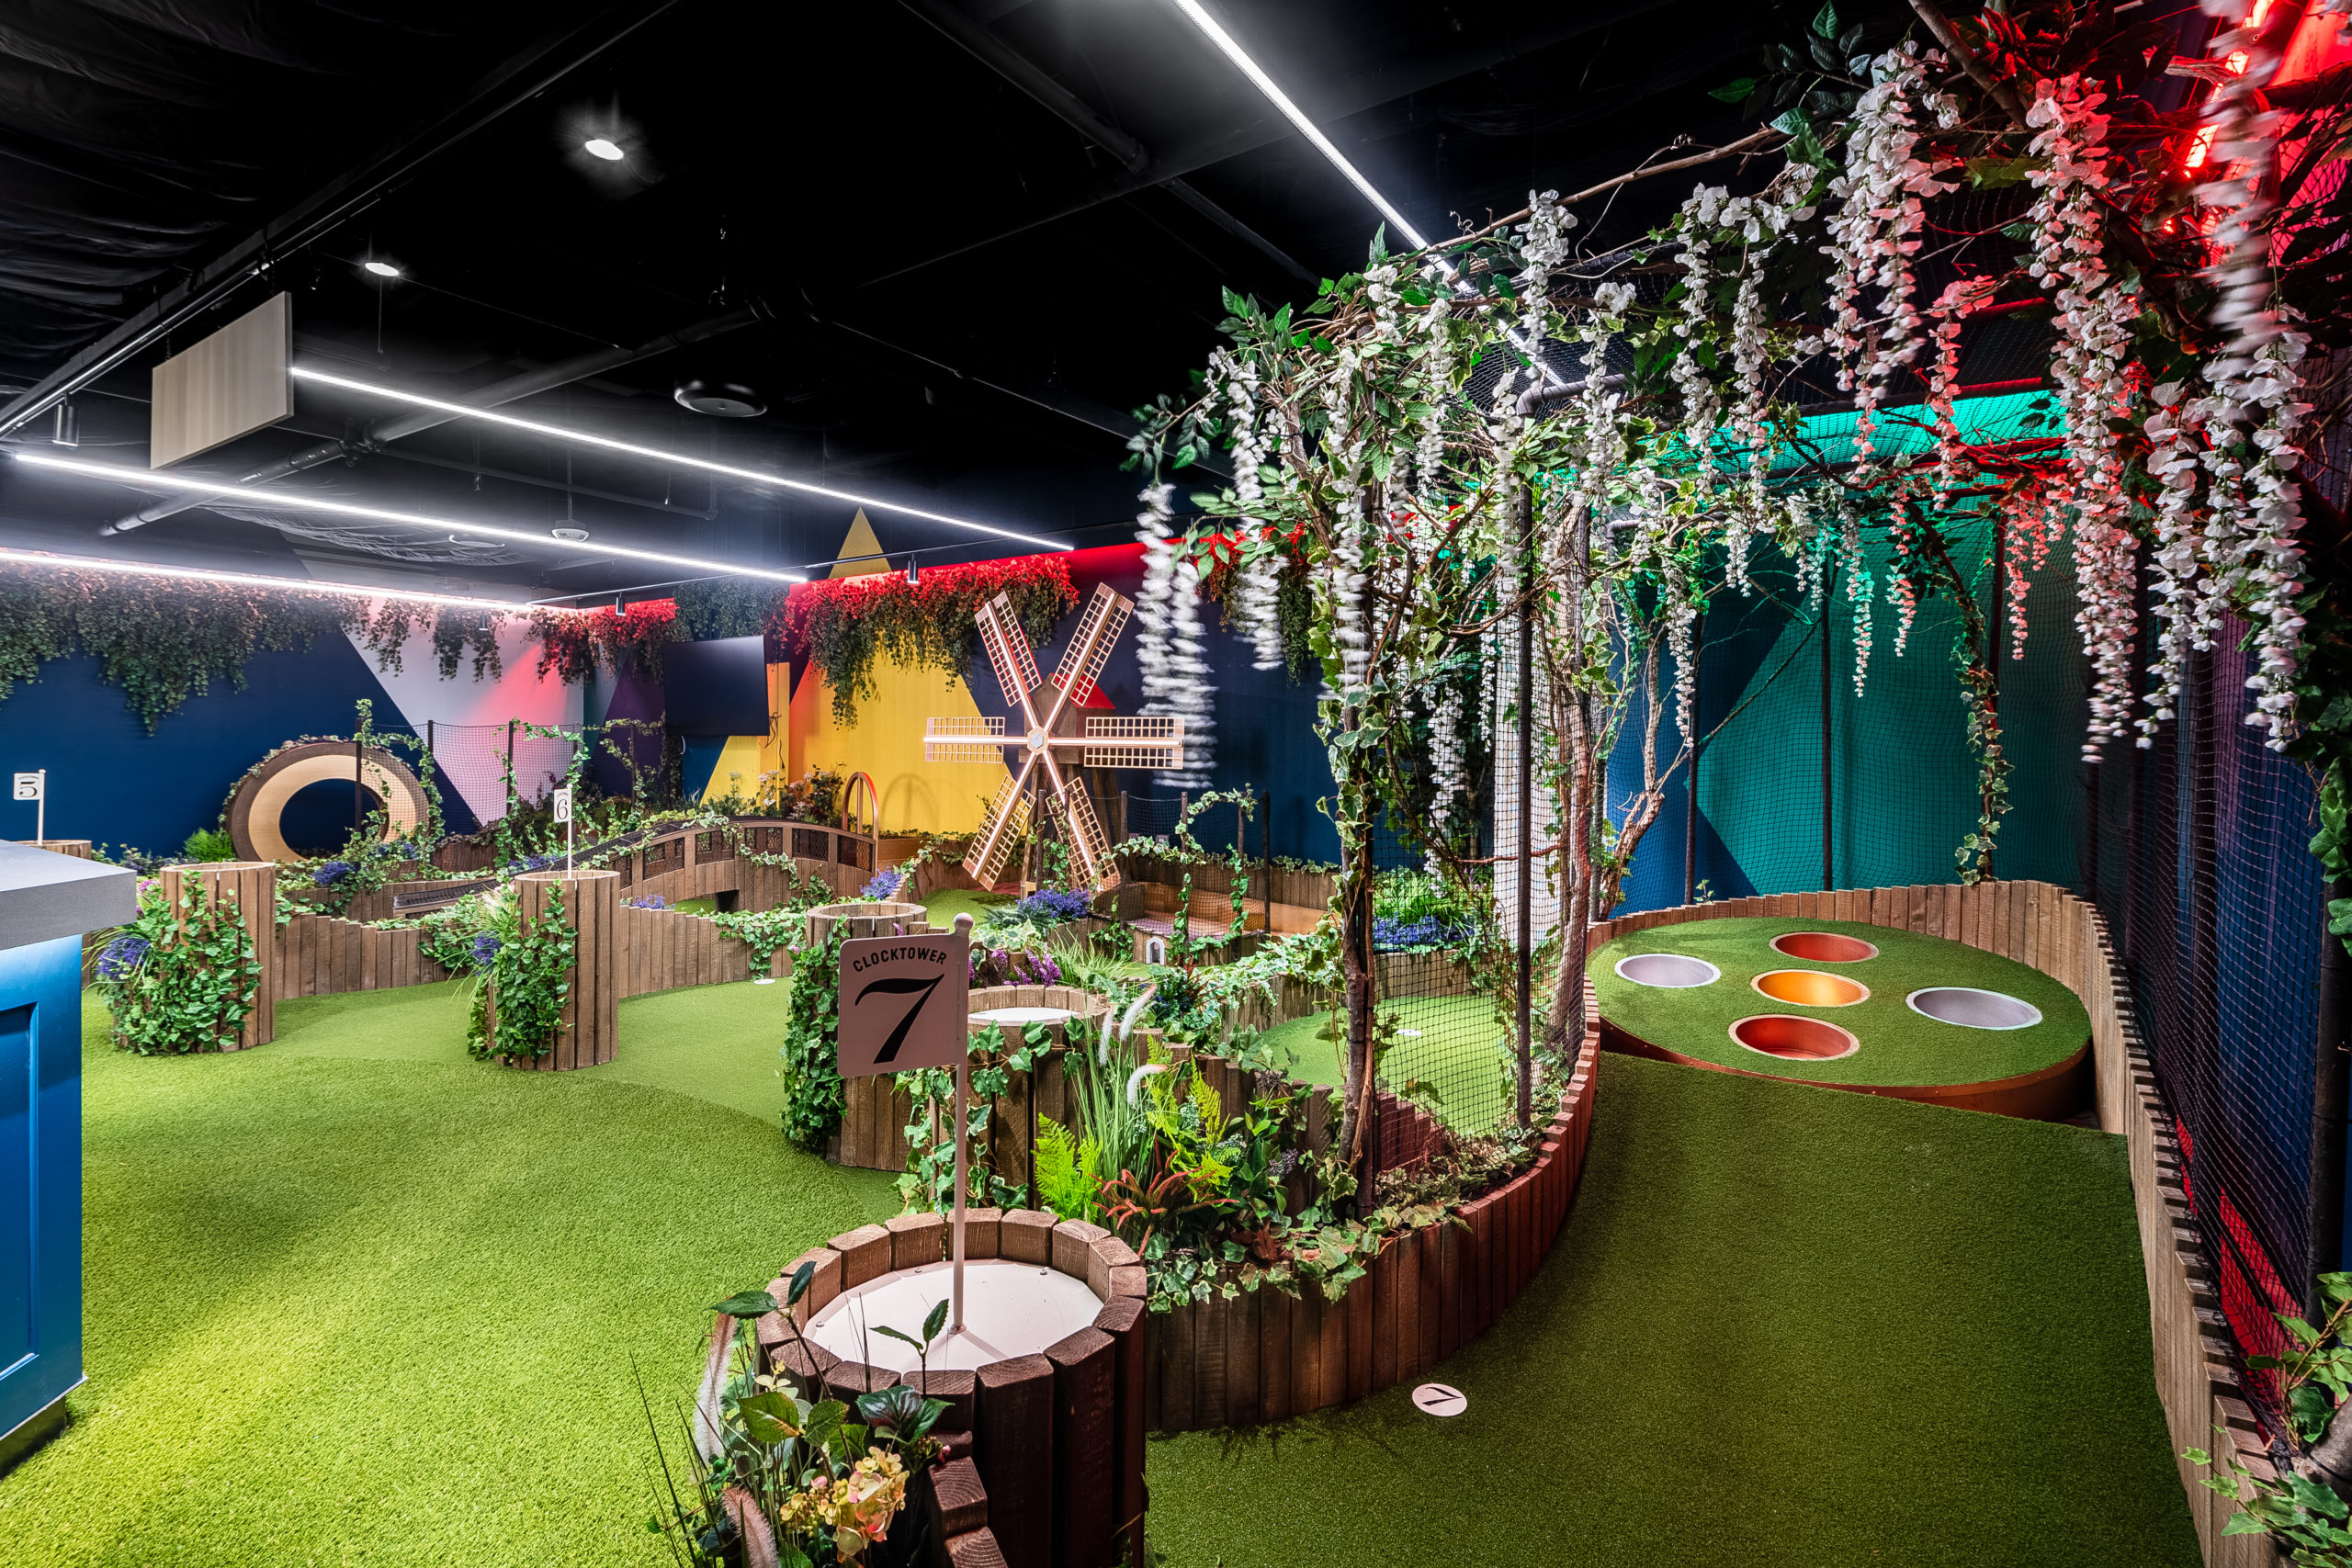 REY LOPEZSwingers Brings Crazy Golf to